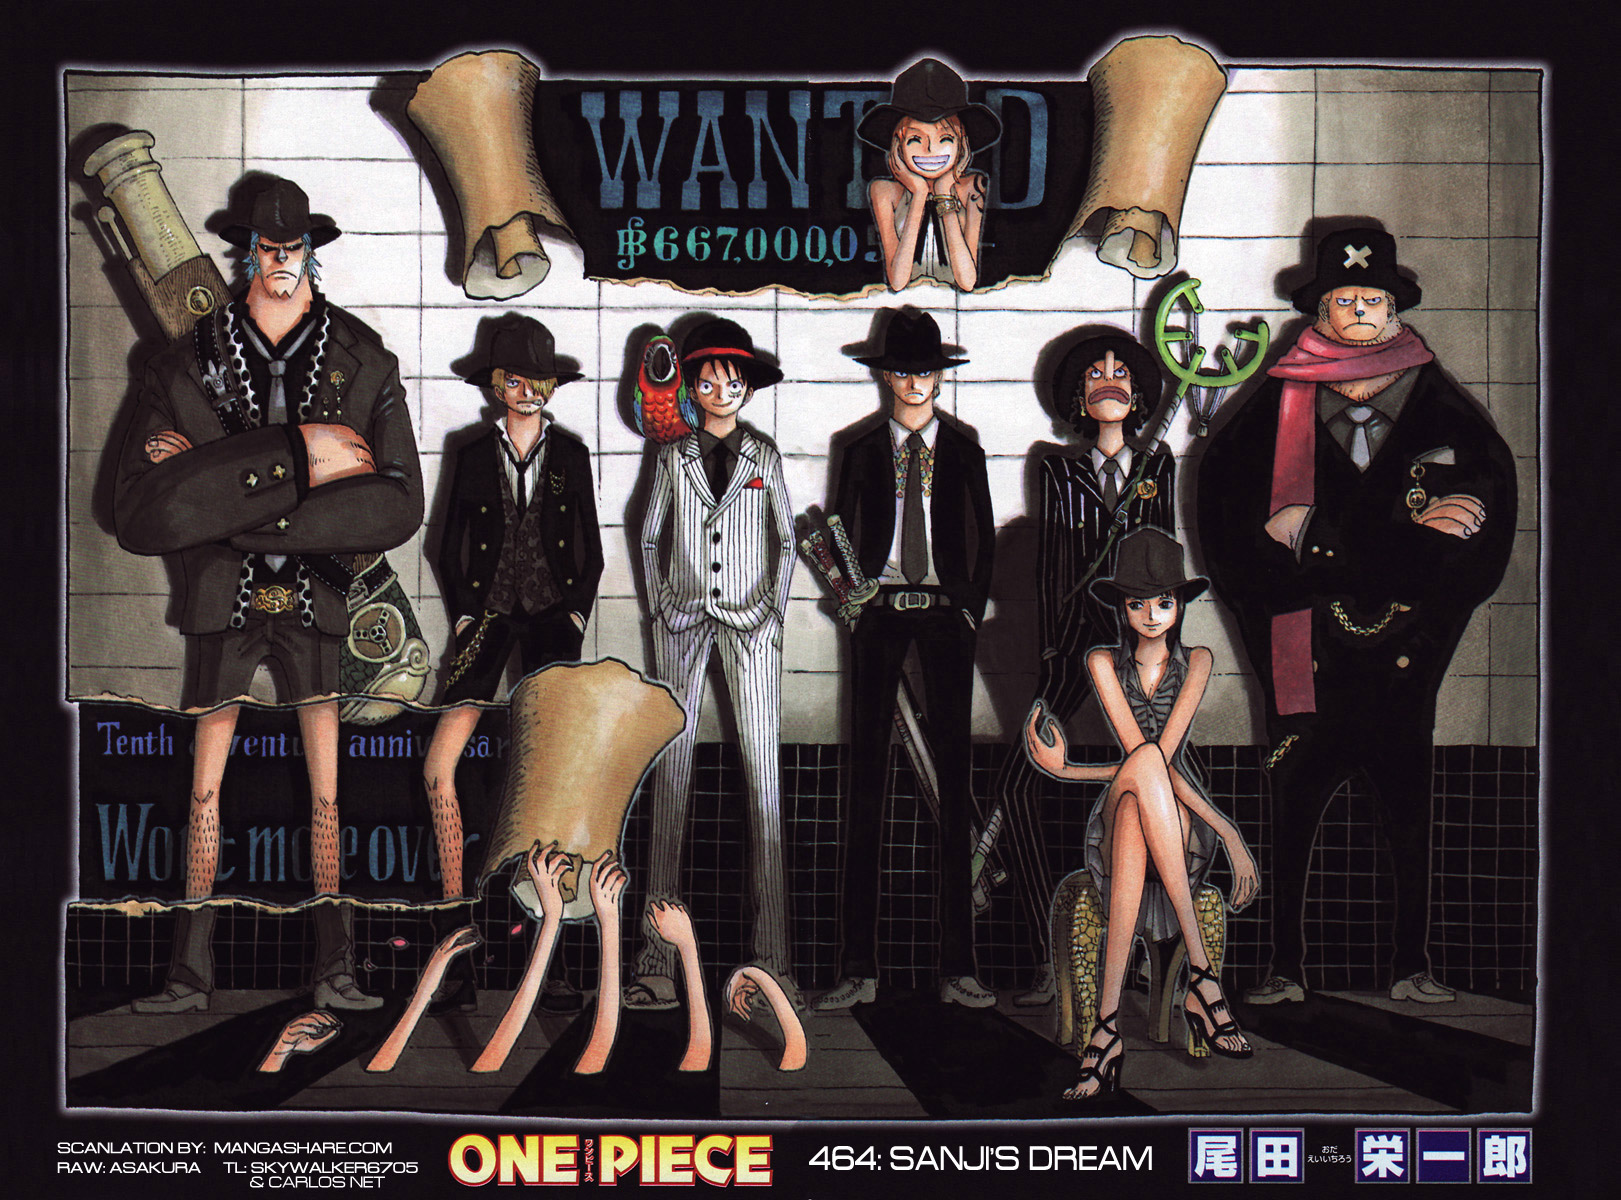 One Piece - Gallery Colection